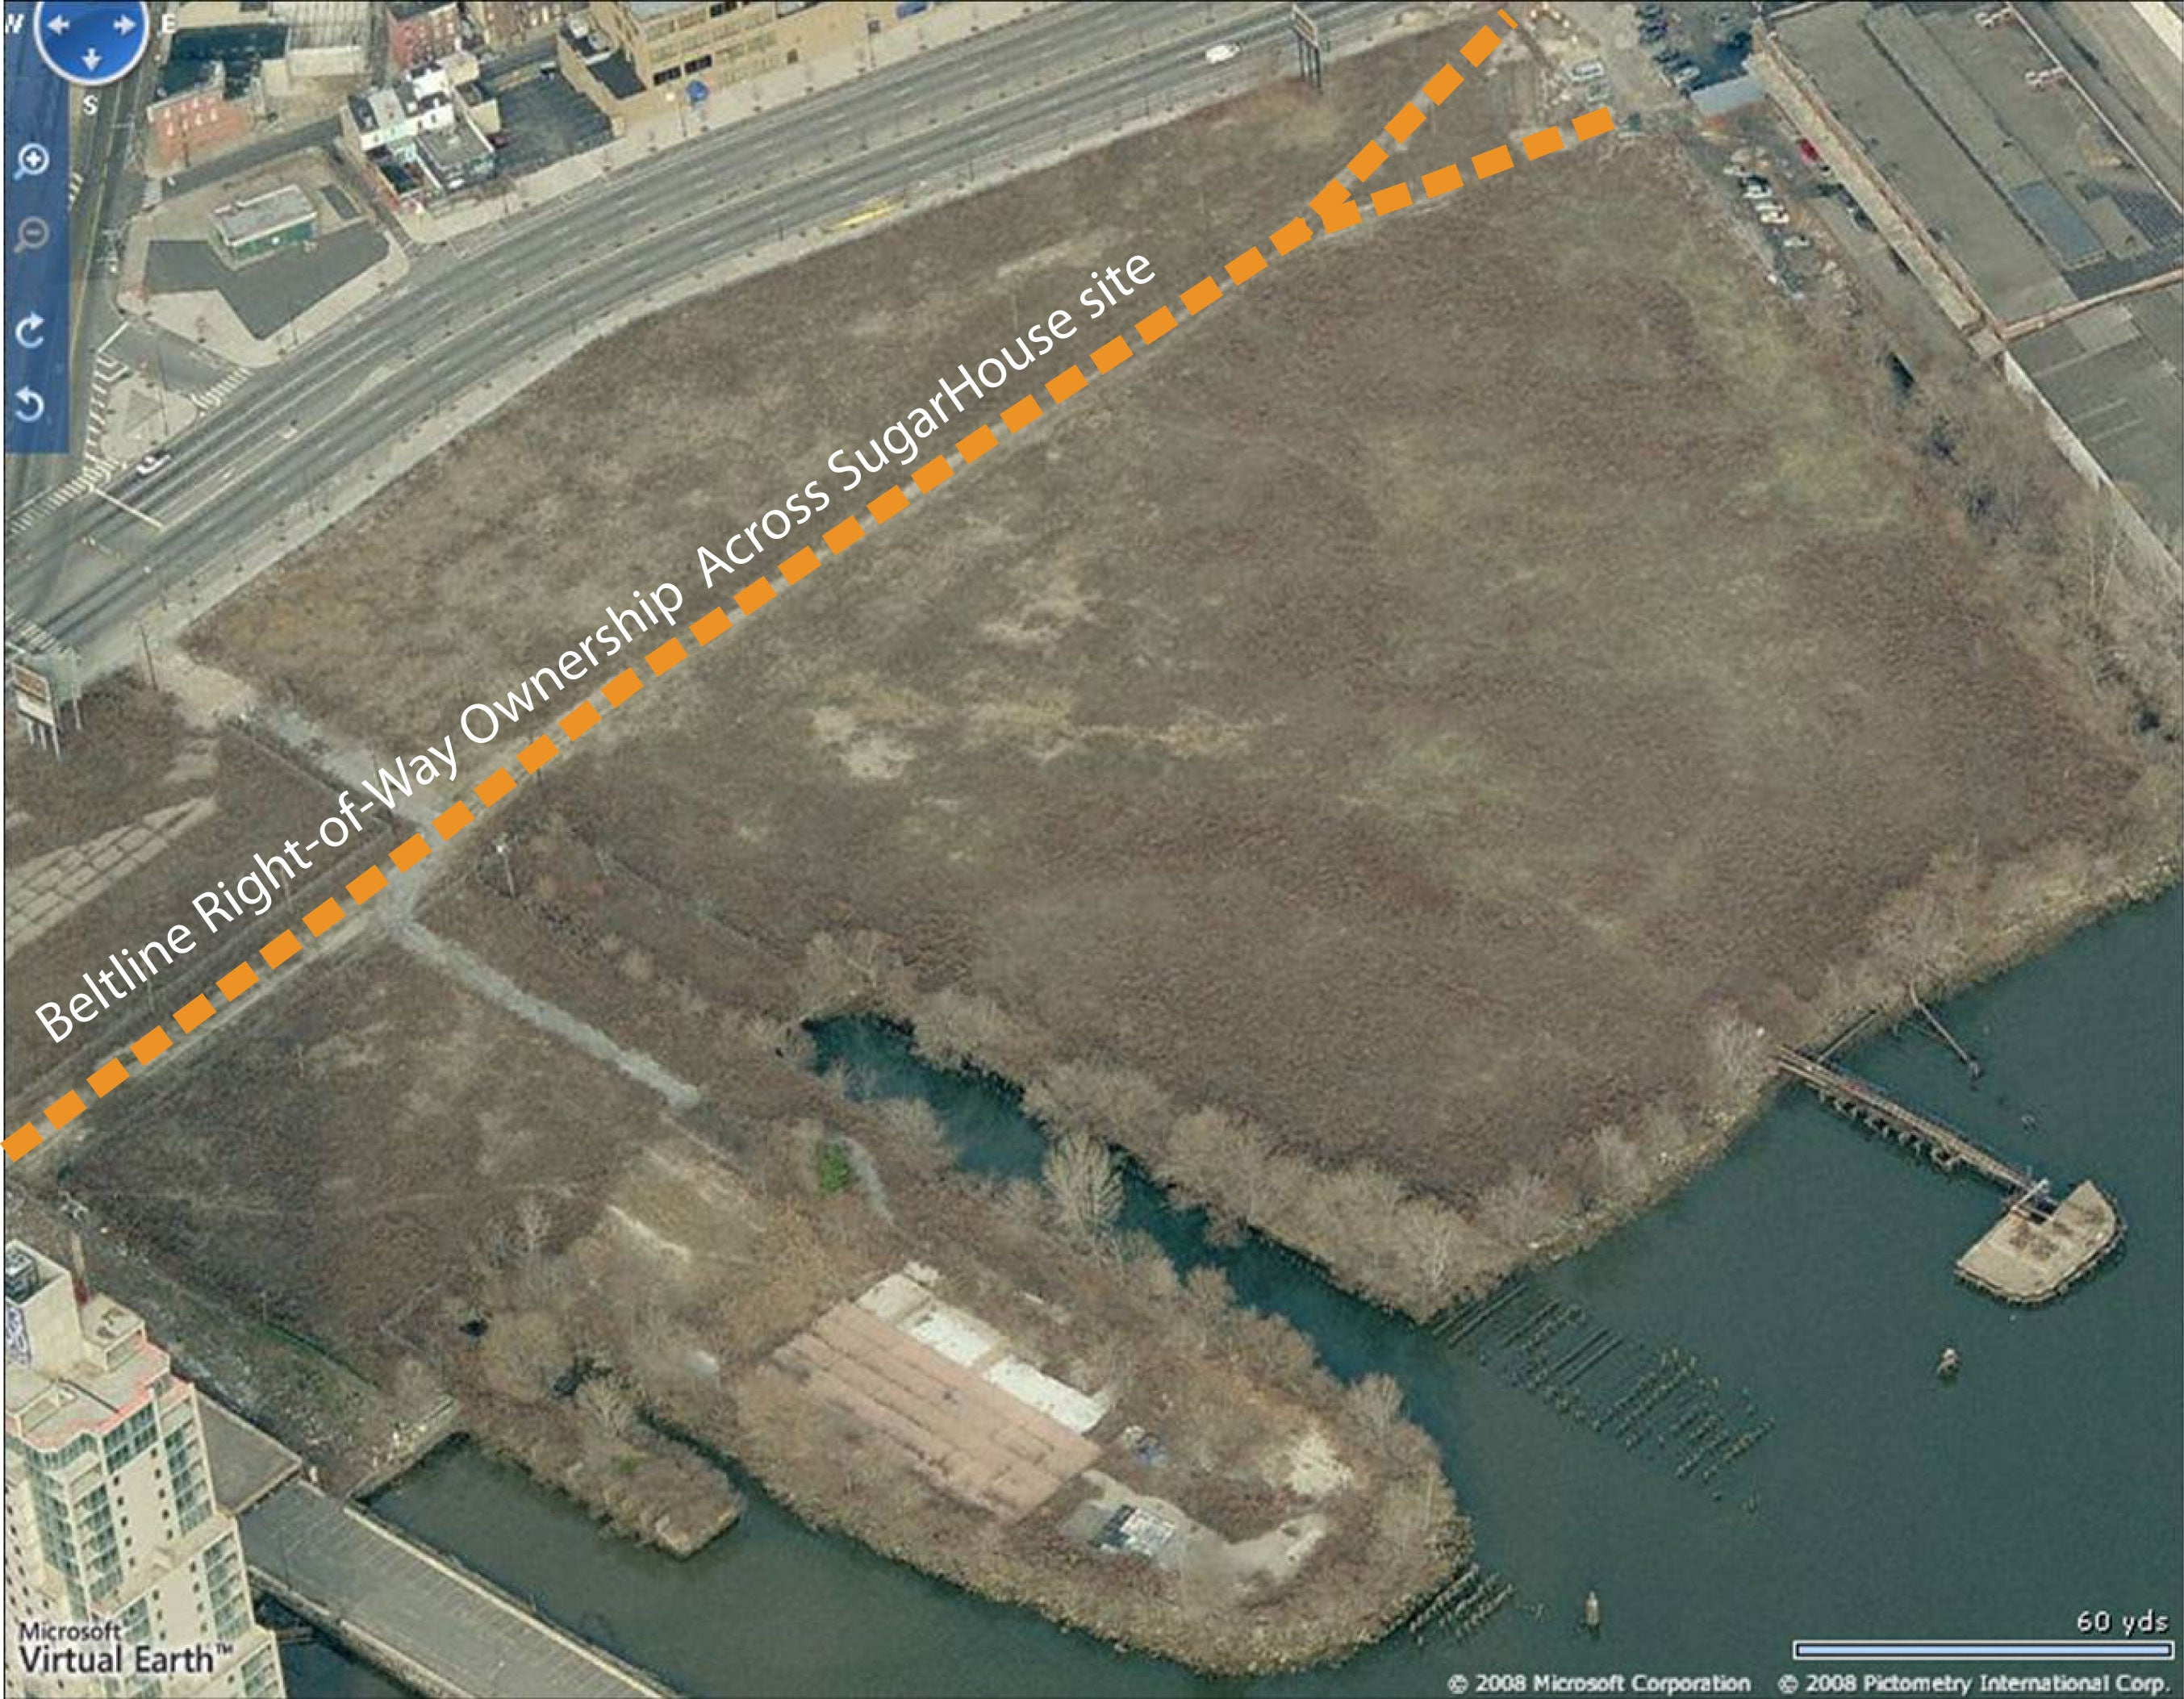 Diagram of Belt Line right-of-way across the SugarHouse Casino site